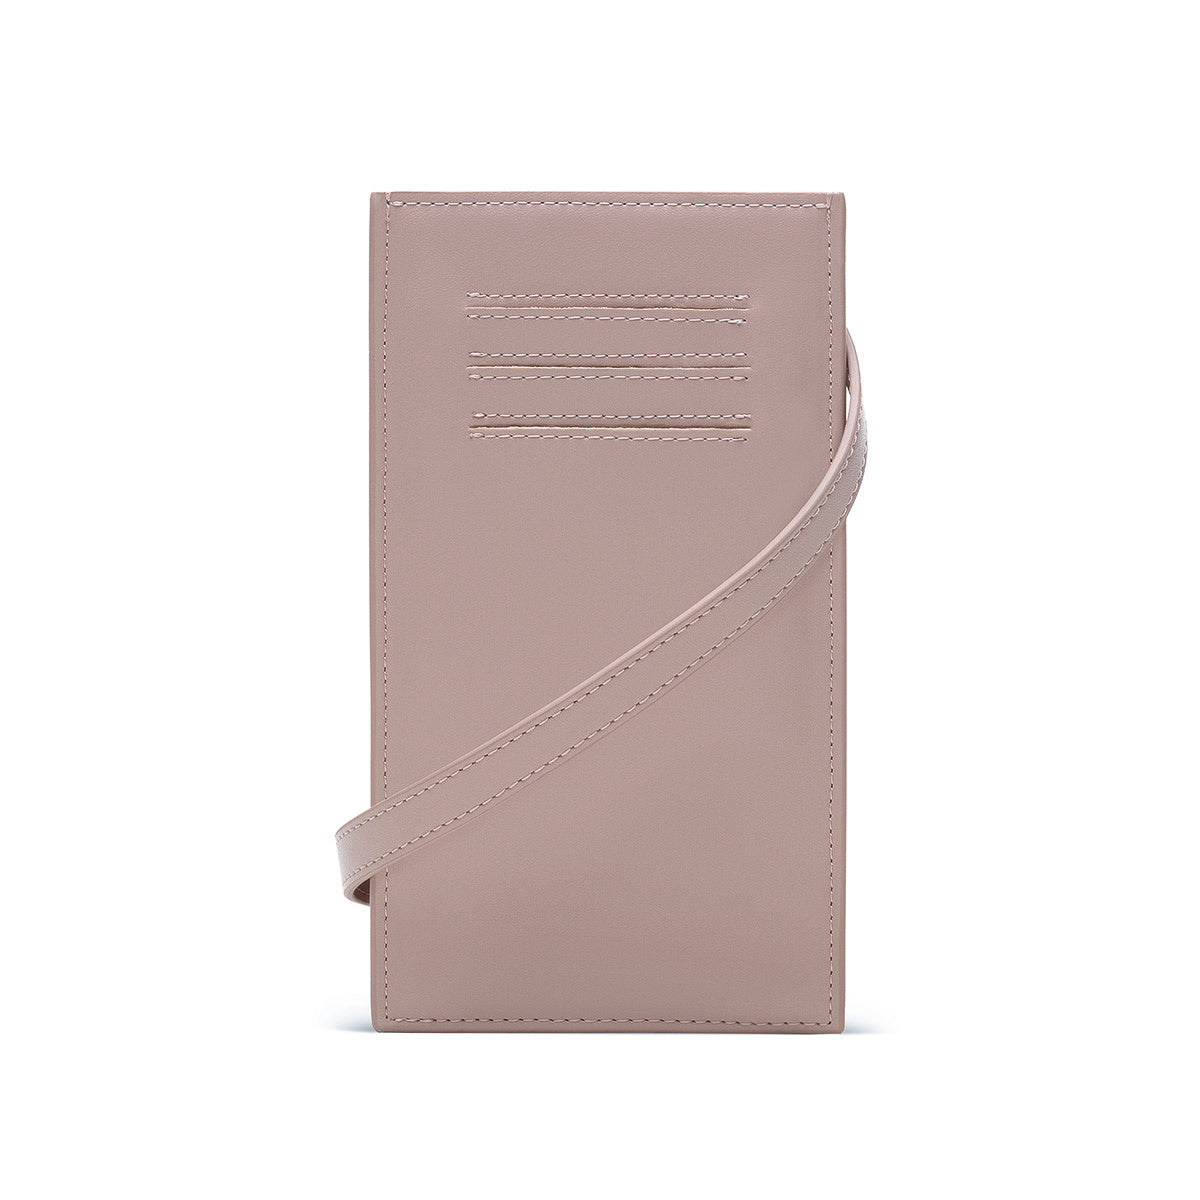 Magnetic Front Flap Long Wallet - Cream